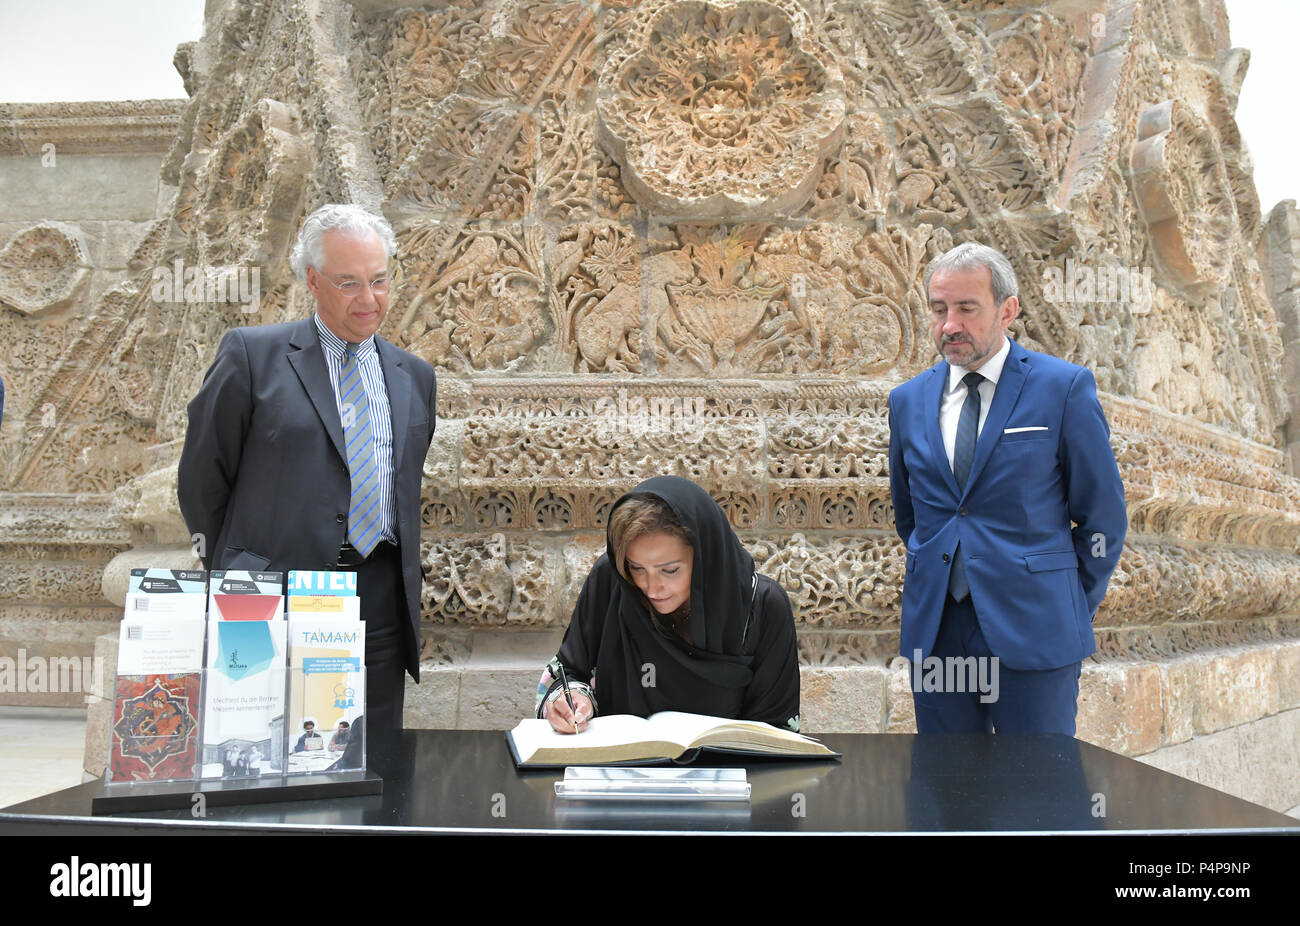 21 June 2018, Germany, Berlin: Princess Lamia Bint Majid Saud Al Saud (C) of Saudi Arabia, director of the Alwaleed Philanthropies foundation, signs the guest book after a press talk at the Pergamon Museum. Hermann Parzinger (R), President of the Prussian Cultural Heritage Foundation, and Michael Eissenhauer, General Director of the Berlin State Museums, stand next to her. The Museum for Islamic Art of the Berlin State Museum received a generous support of the Alwaleed Philanthropies foundation. Over a period of ten years, the areas of exhibition development and cultural education are to be su Stock Photo